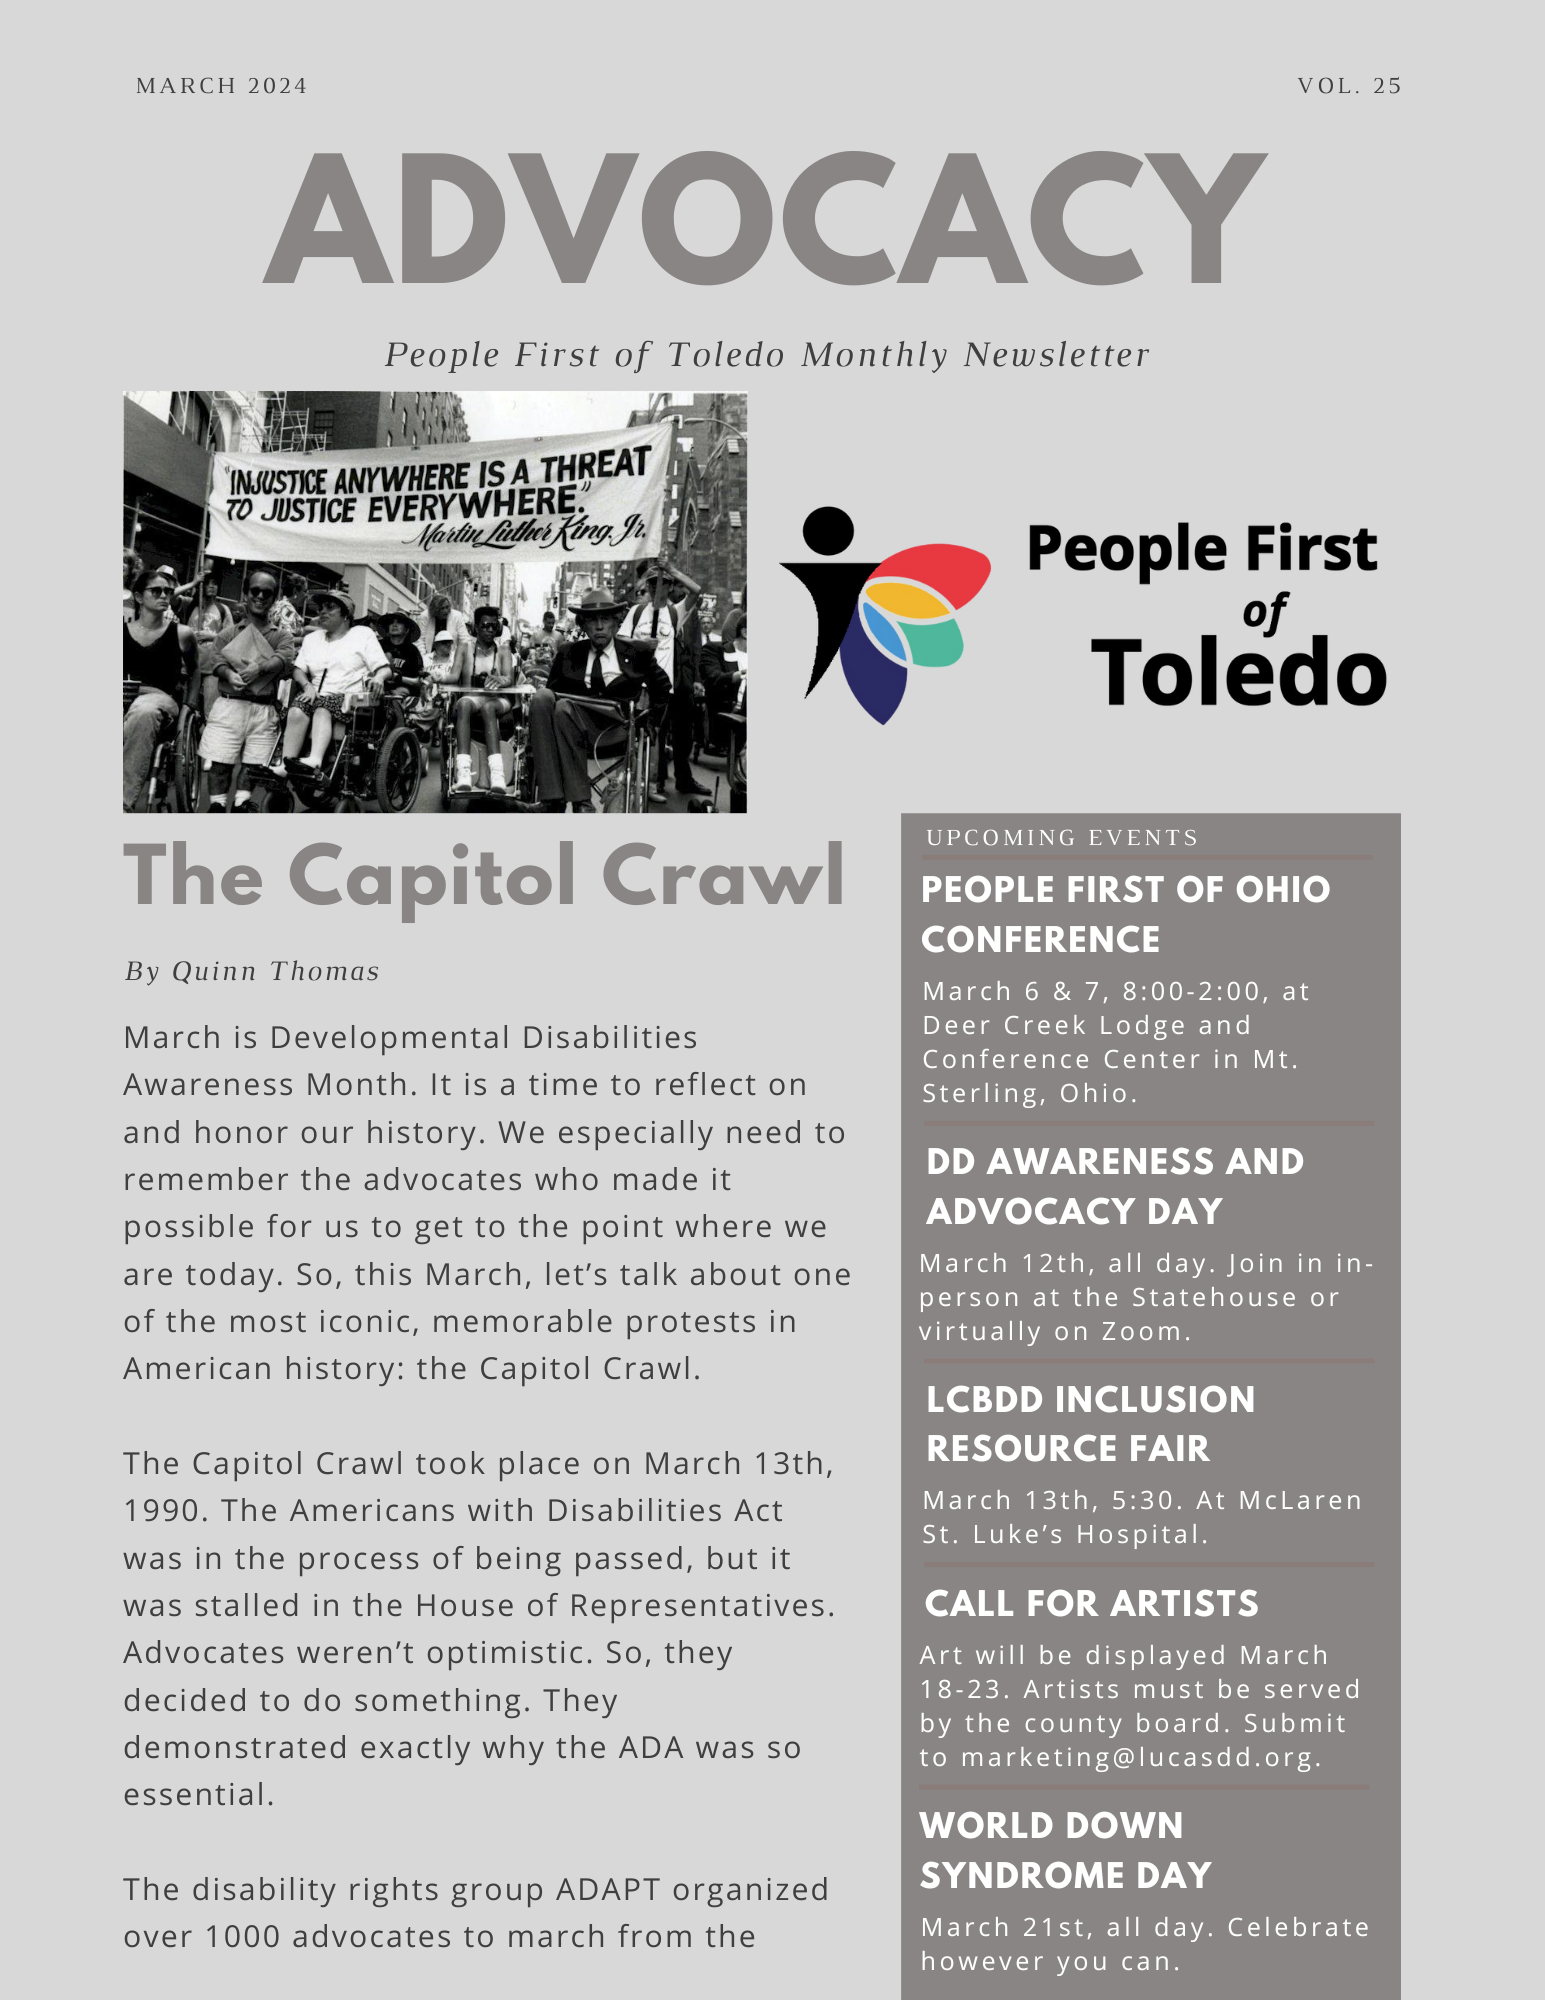 The front page of People First of Toledo's March 2024 newsletter.